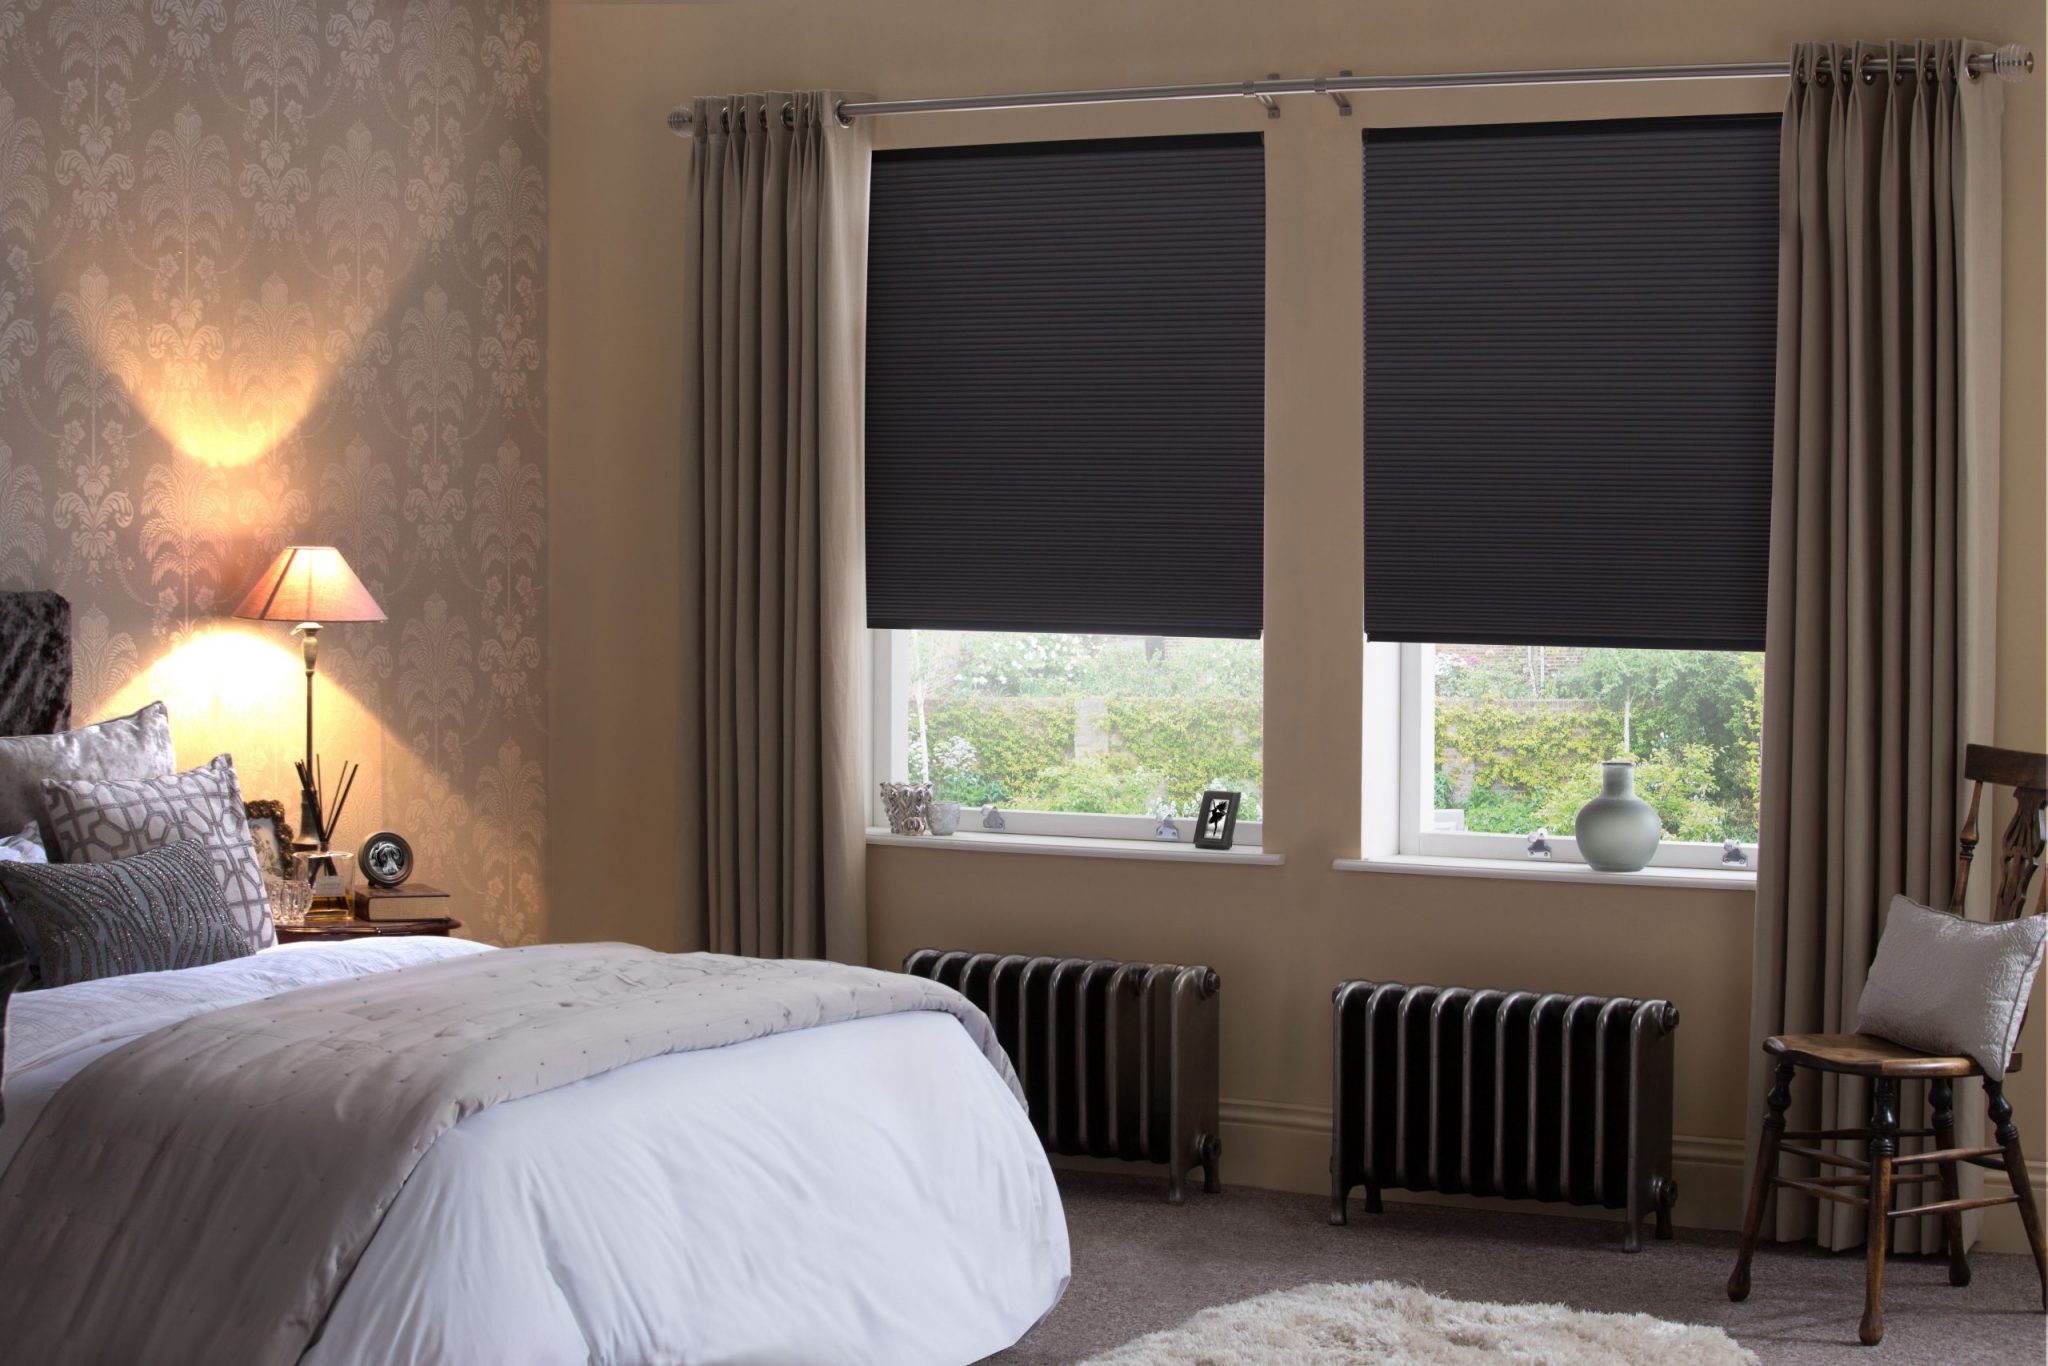 What are the Best Bedroom Blinds? Blinds for Bedroom Windows